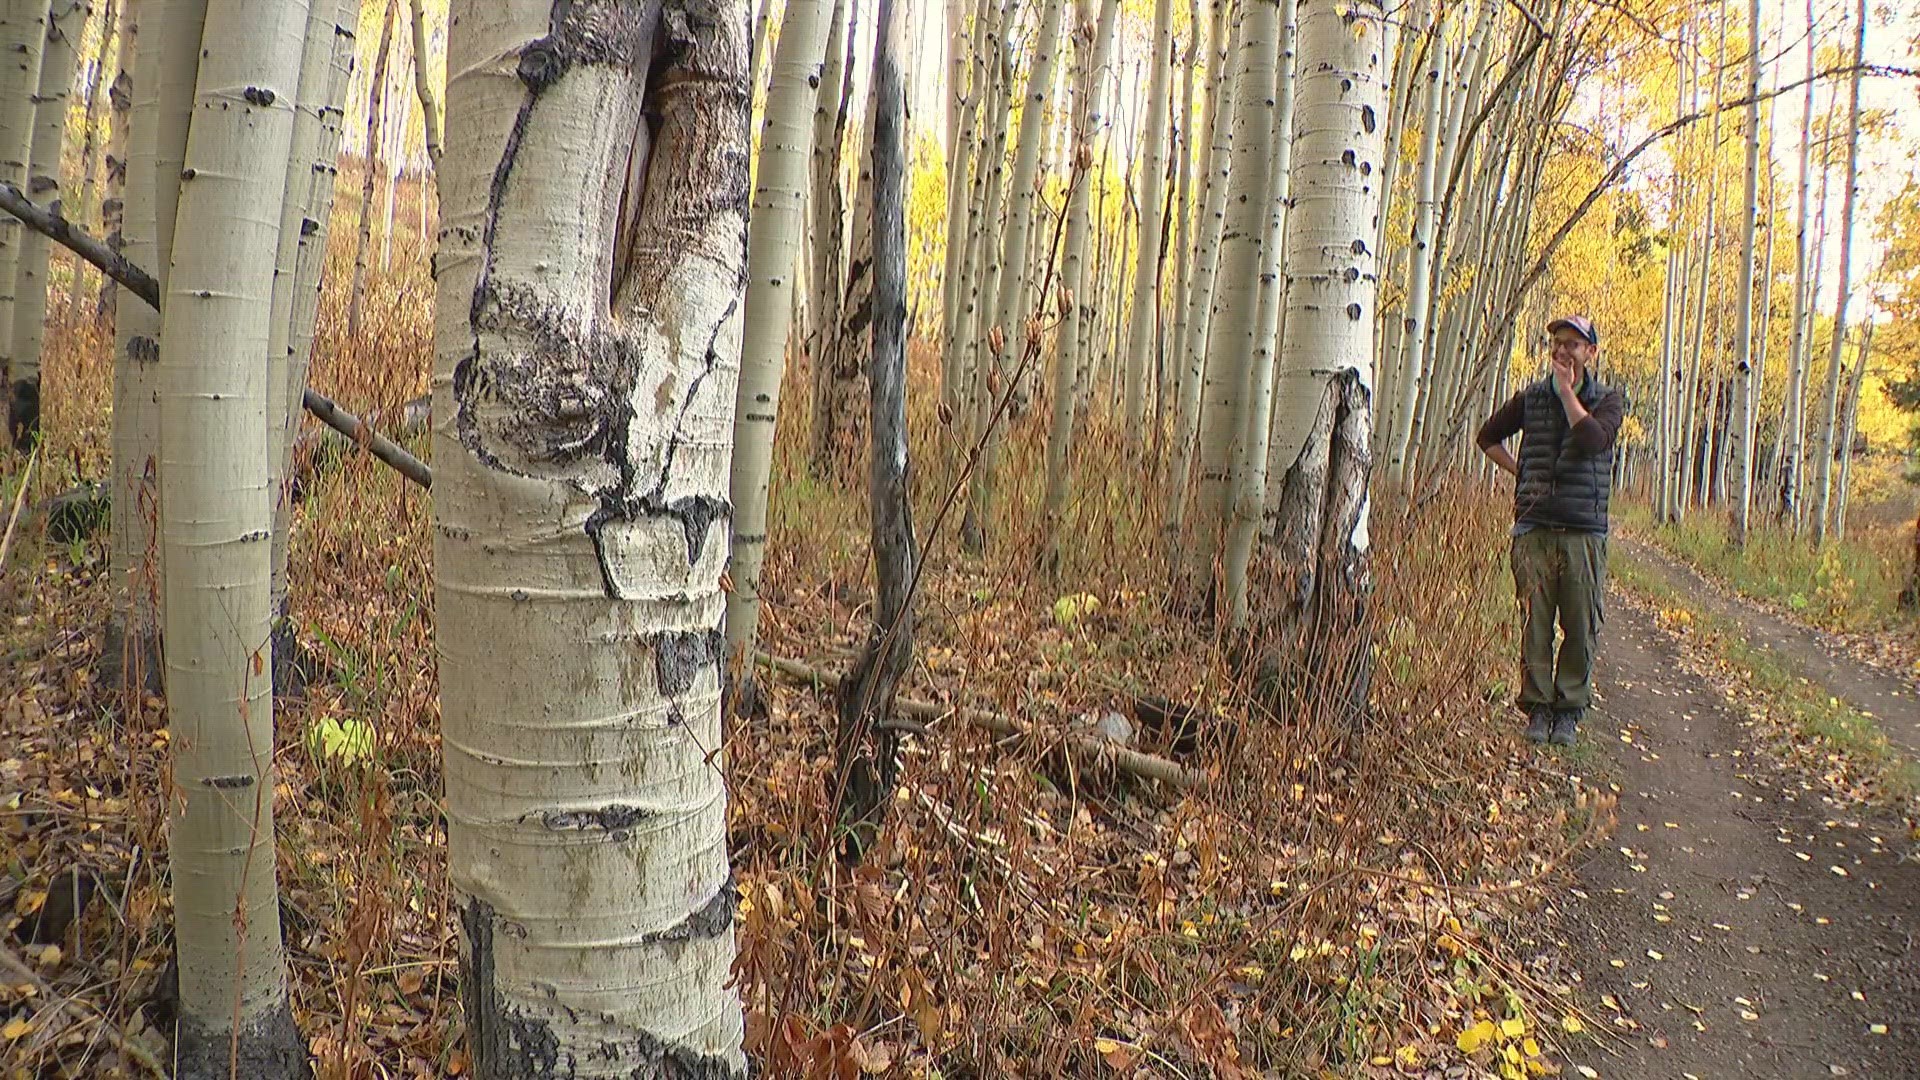 9NEWS headed to one of the best spots to see aspens near Crested Butte to learn more about the tree that fills Instagram feeds every fall.